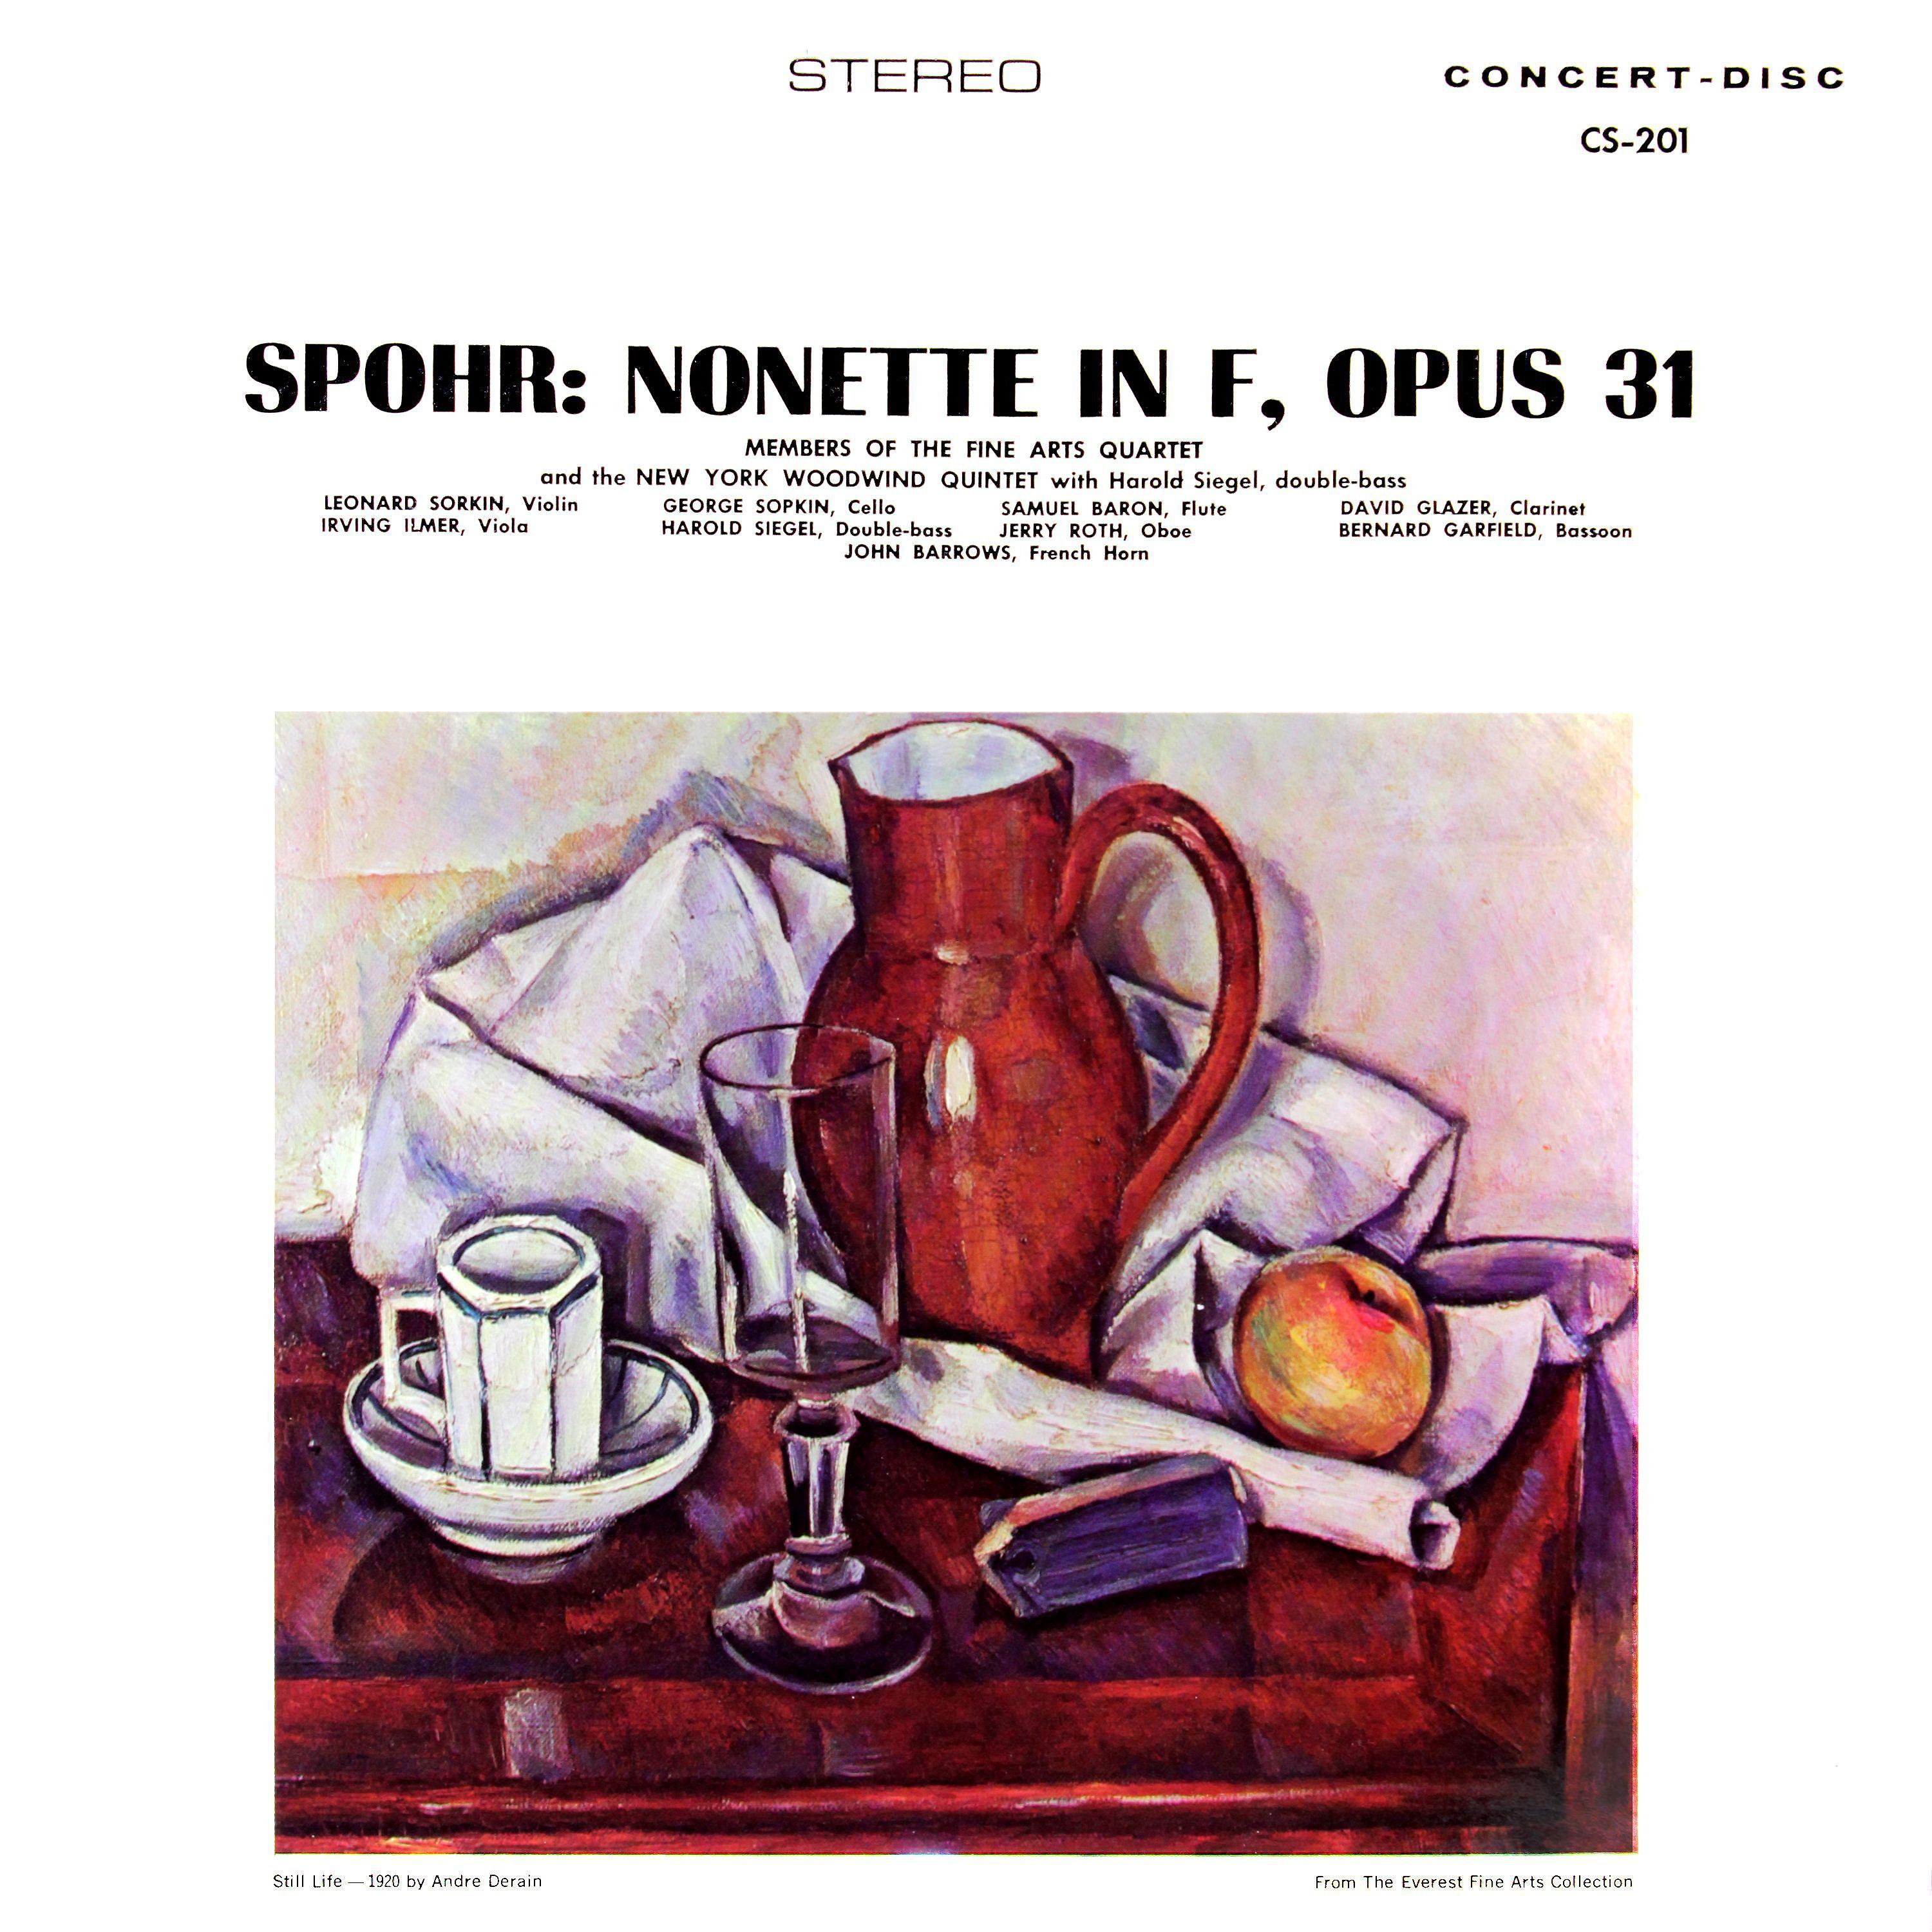 Постер альбома Spohr: Nonet in F Major, Op. 31 (Remastered from the Original Concert-Disc Master Tapes)